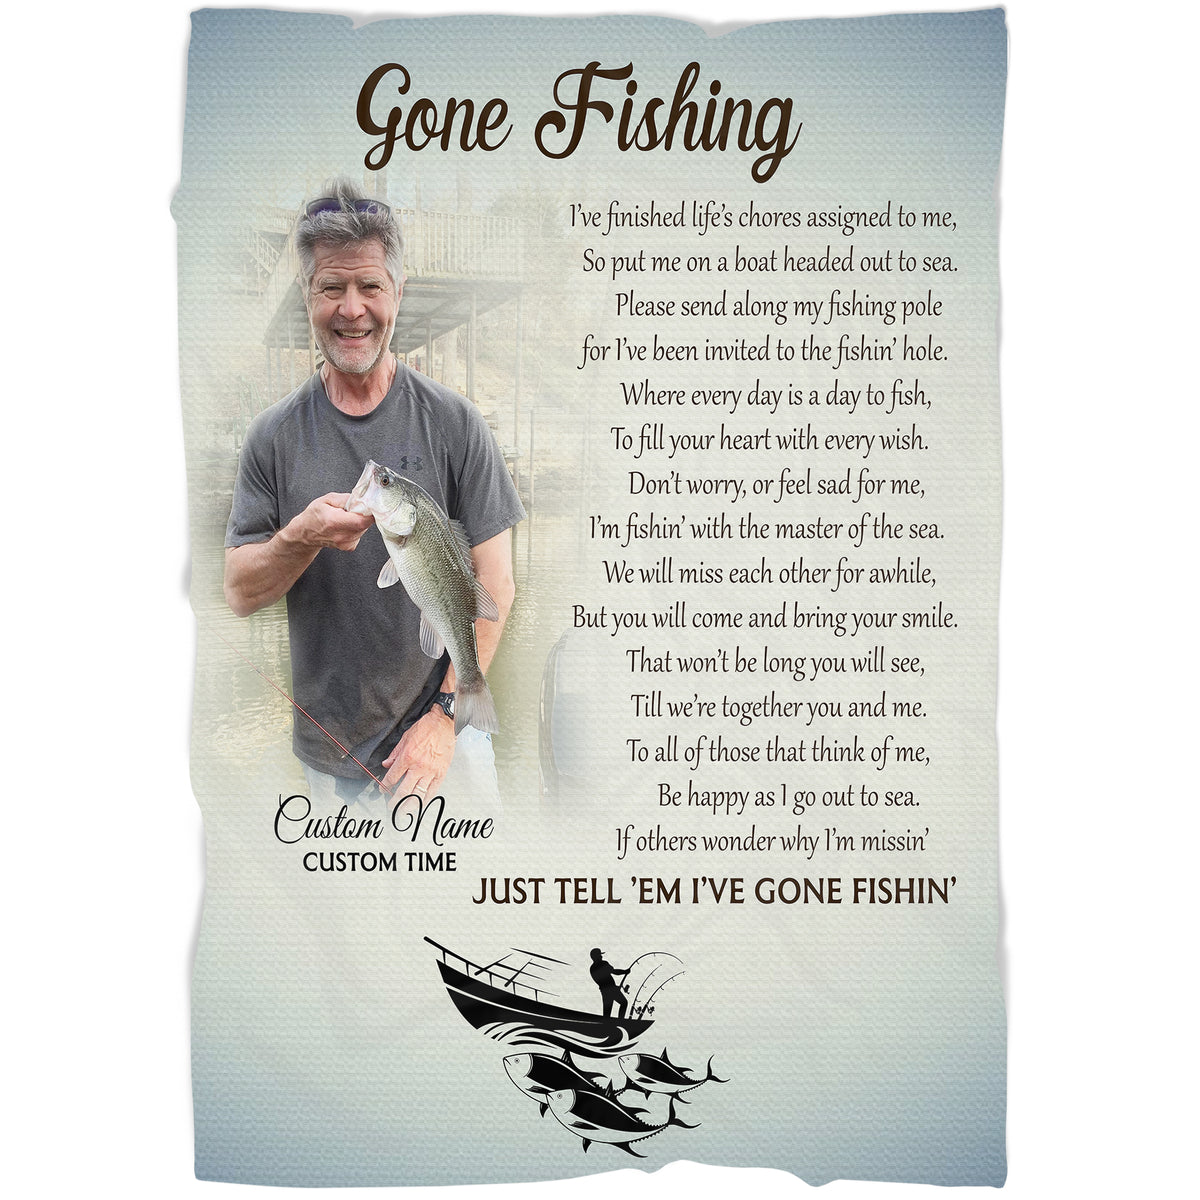  Personalized Fishing Memorial Ornament, Gone Fishing in Heaven  Ornament, in Loving Memory Home Decor, Remembrance Gifts for Fisherman,  Loss of Dad, Husband, Brother, Uncle : Home & Kitchen